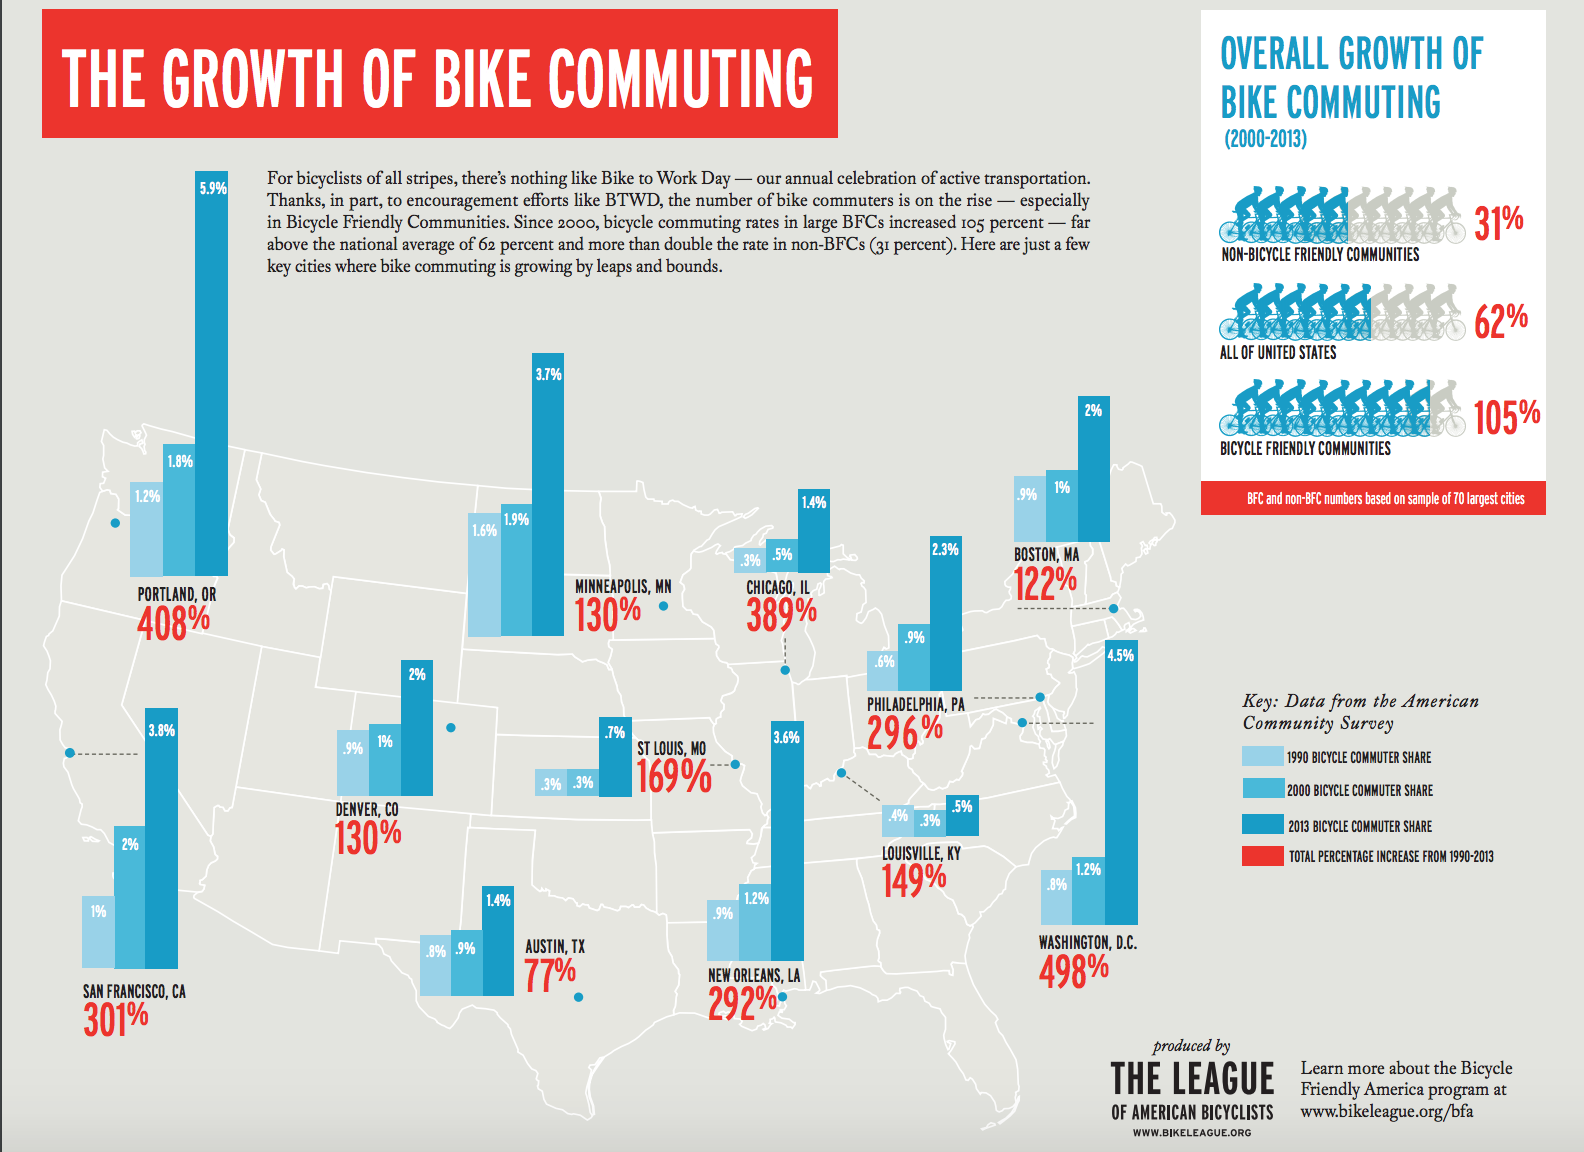 Bike commuting growth from 2000 to 2013. Via League of American Bicyclists and American Community Survey.